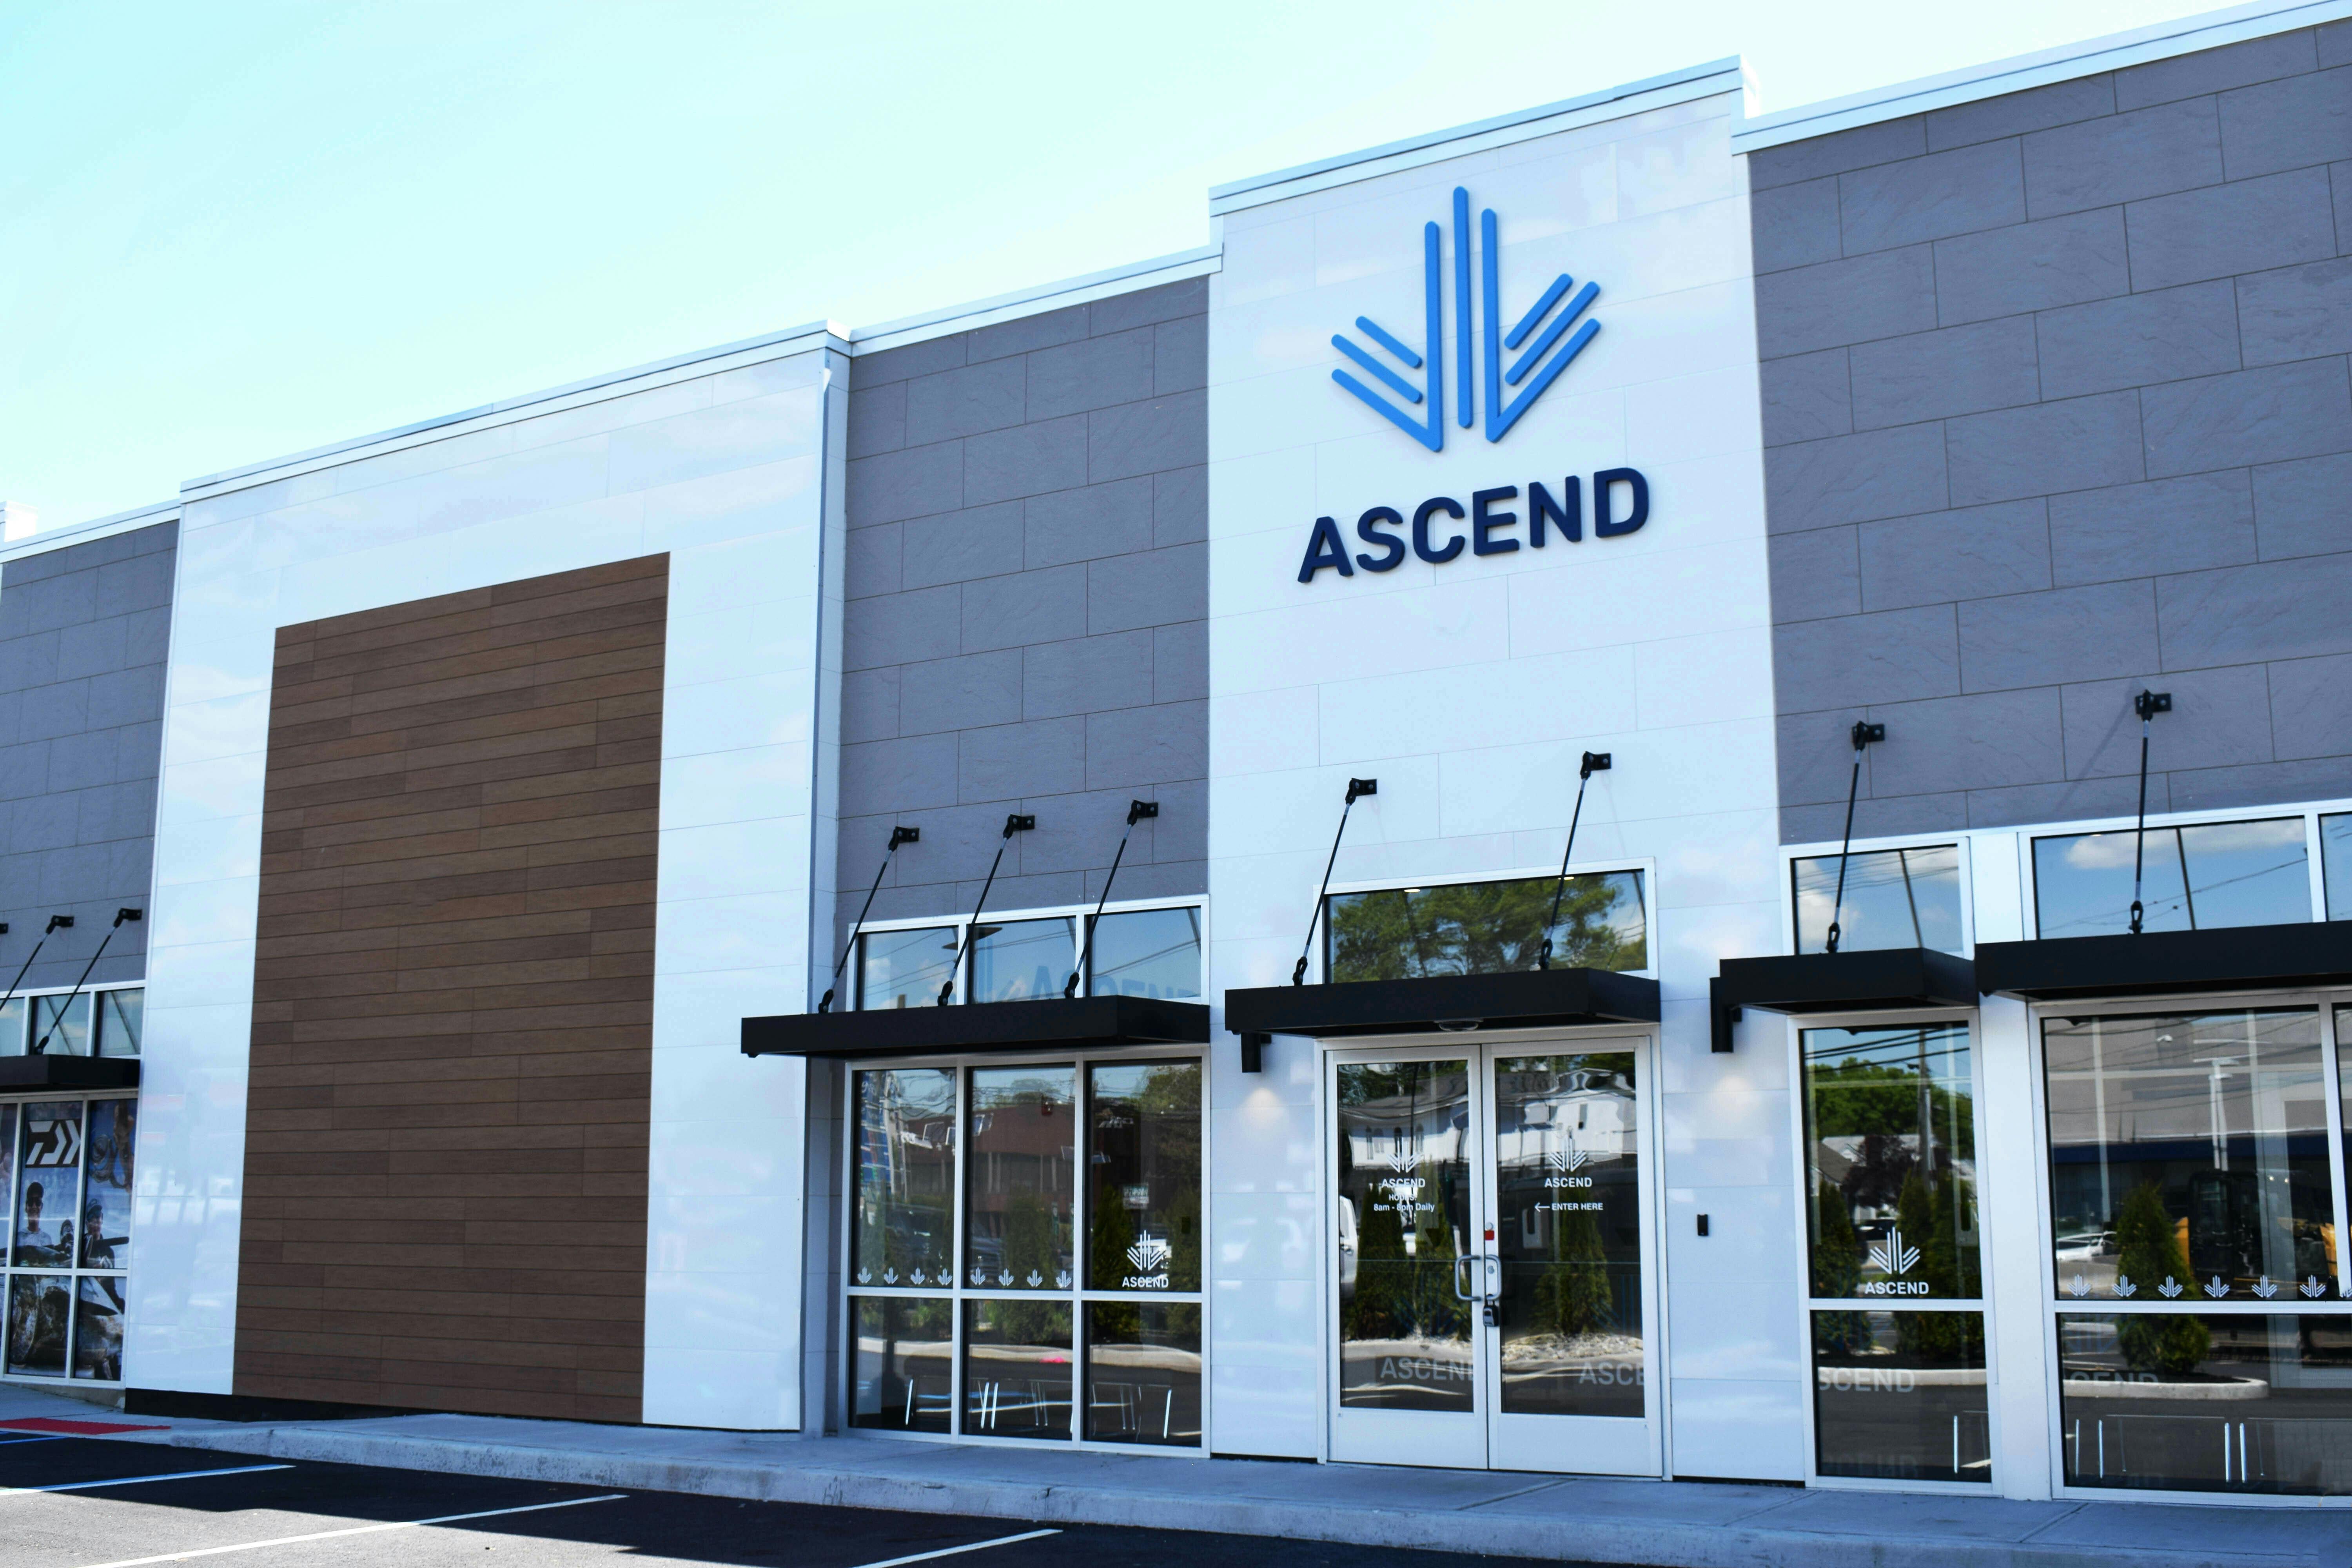 Ascend Cannabis Recreational and Medical Dispensary - Rochelle Park